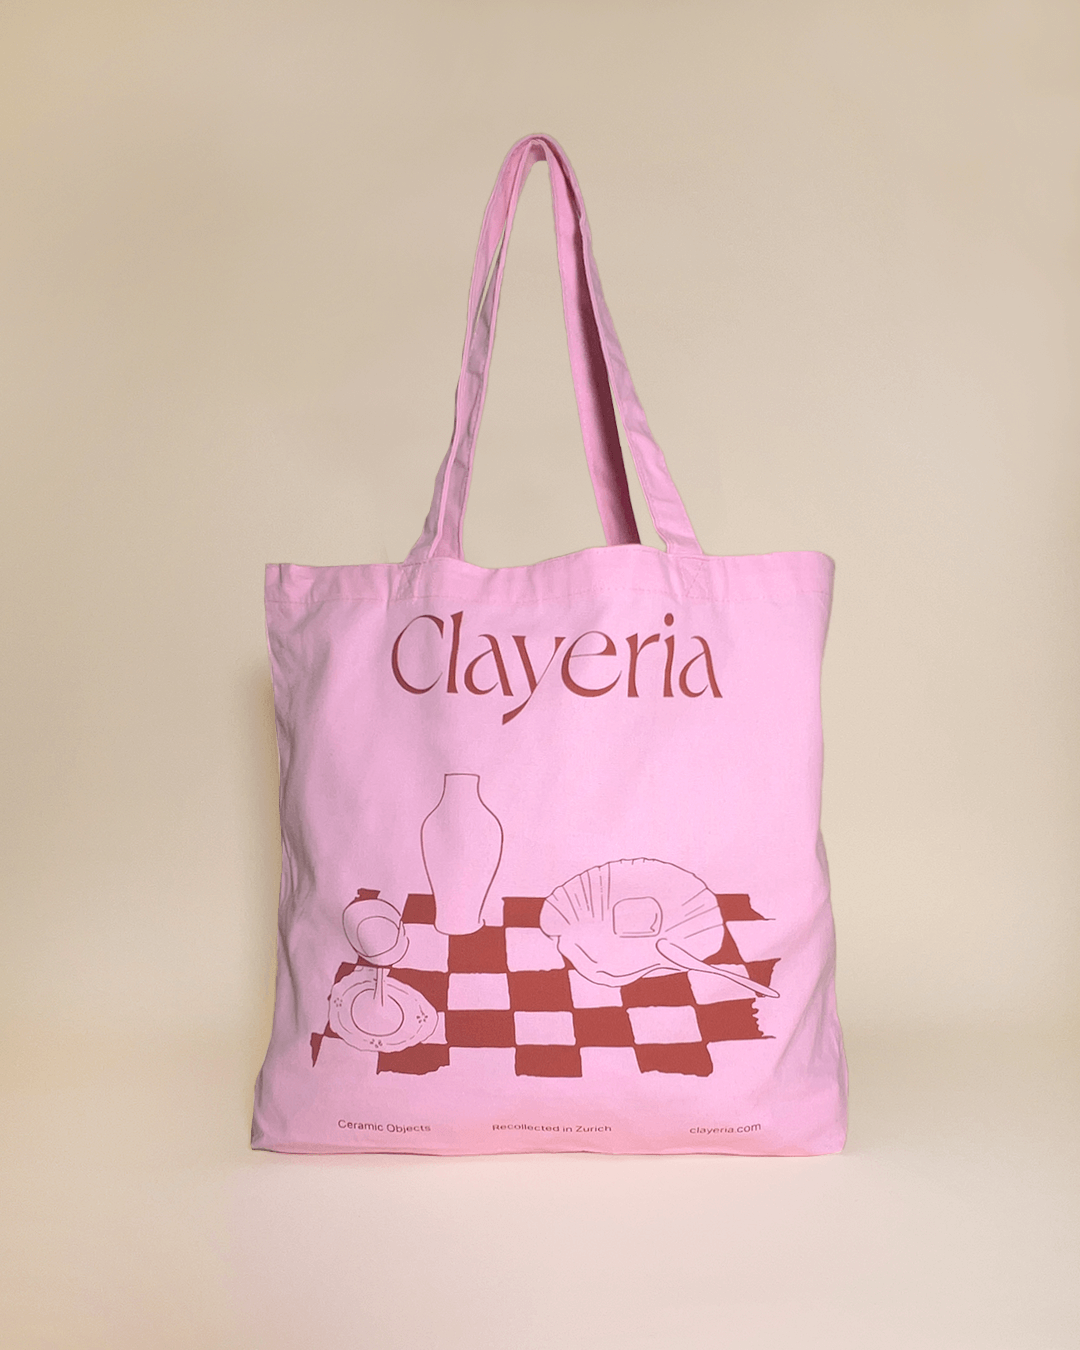 Our high-quality Clayeria Shopper made out of durable and thick cotton gives your outfit the perfect pop of color. The powdery pink bag with our signature tablescape illustration in terracotta comes in the perfect size to carry your laptop to work, your pottery tools to the atelier or simply your essential knick-knacks wherever the day might take you.